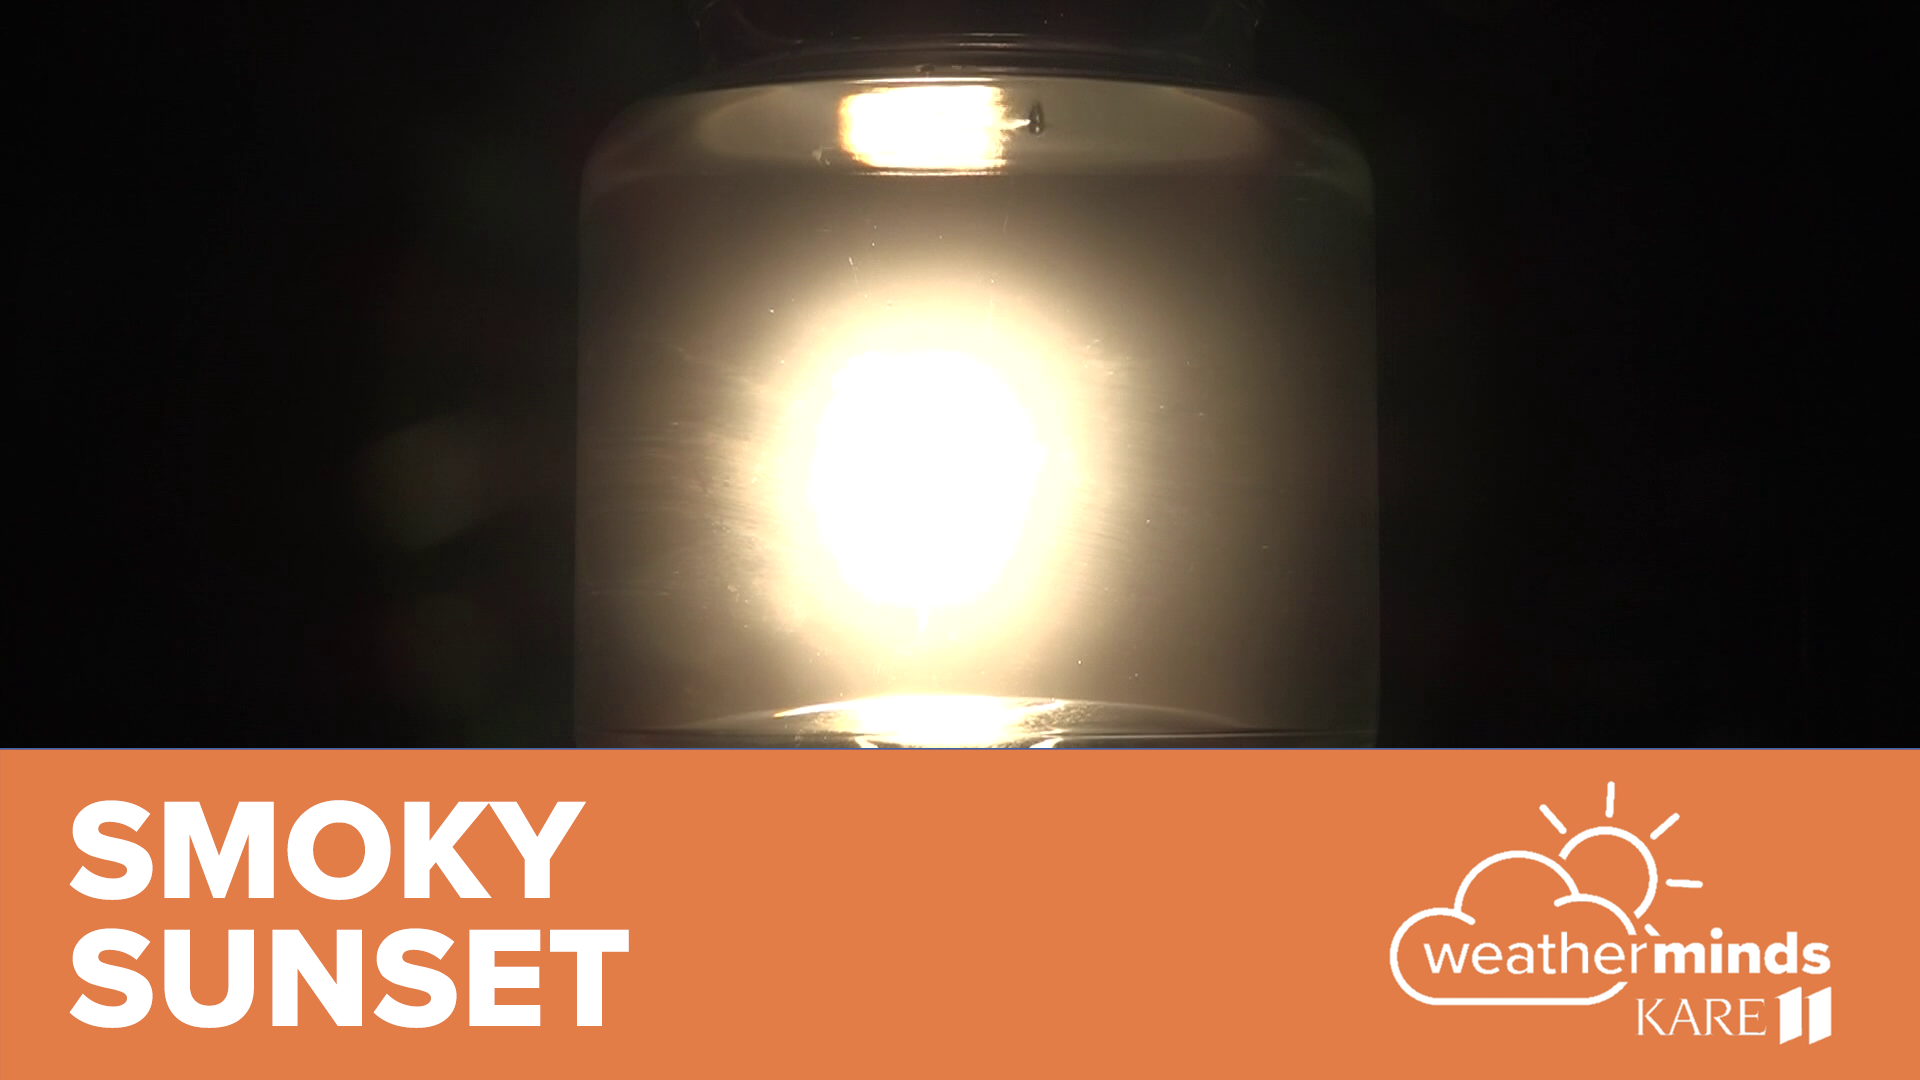 Using water, milk and a flashlight, KARE 11 Meteorologist Ben Dery makes a sunset of his own that you can do as well!